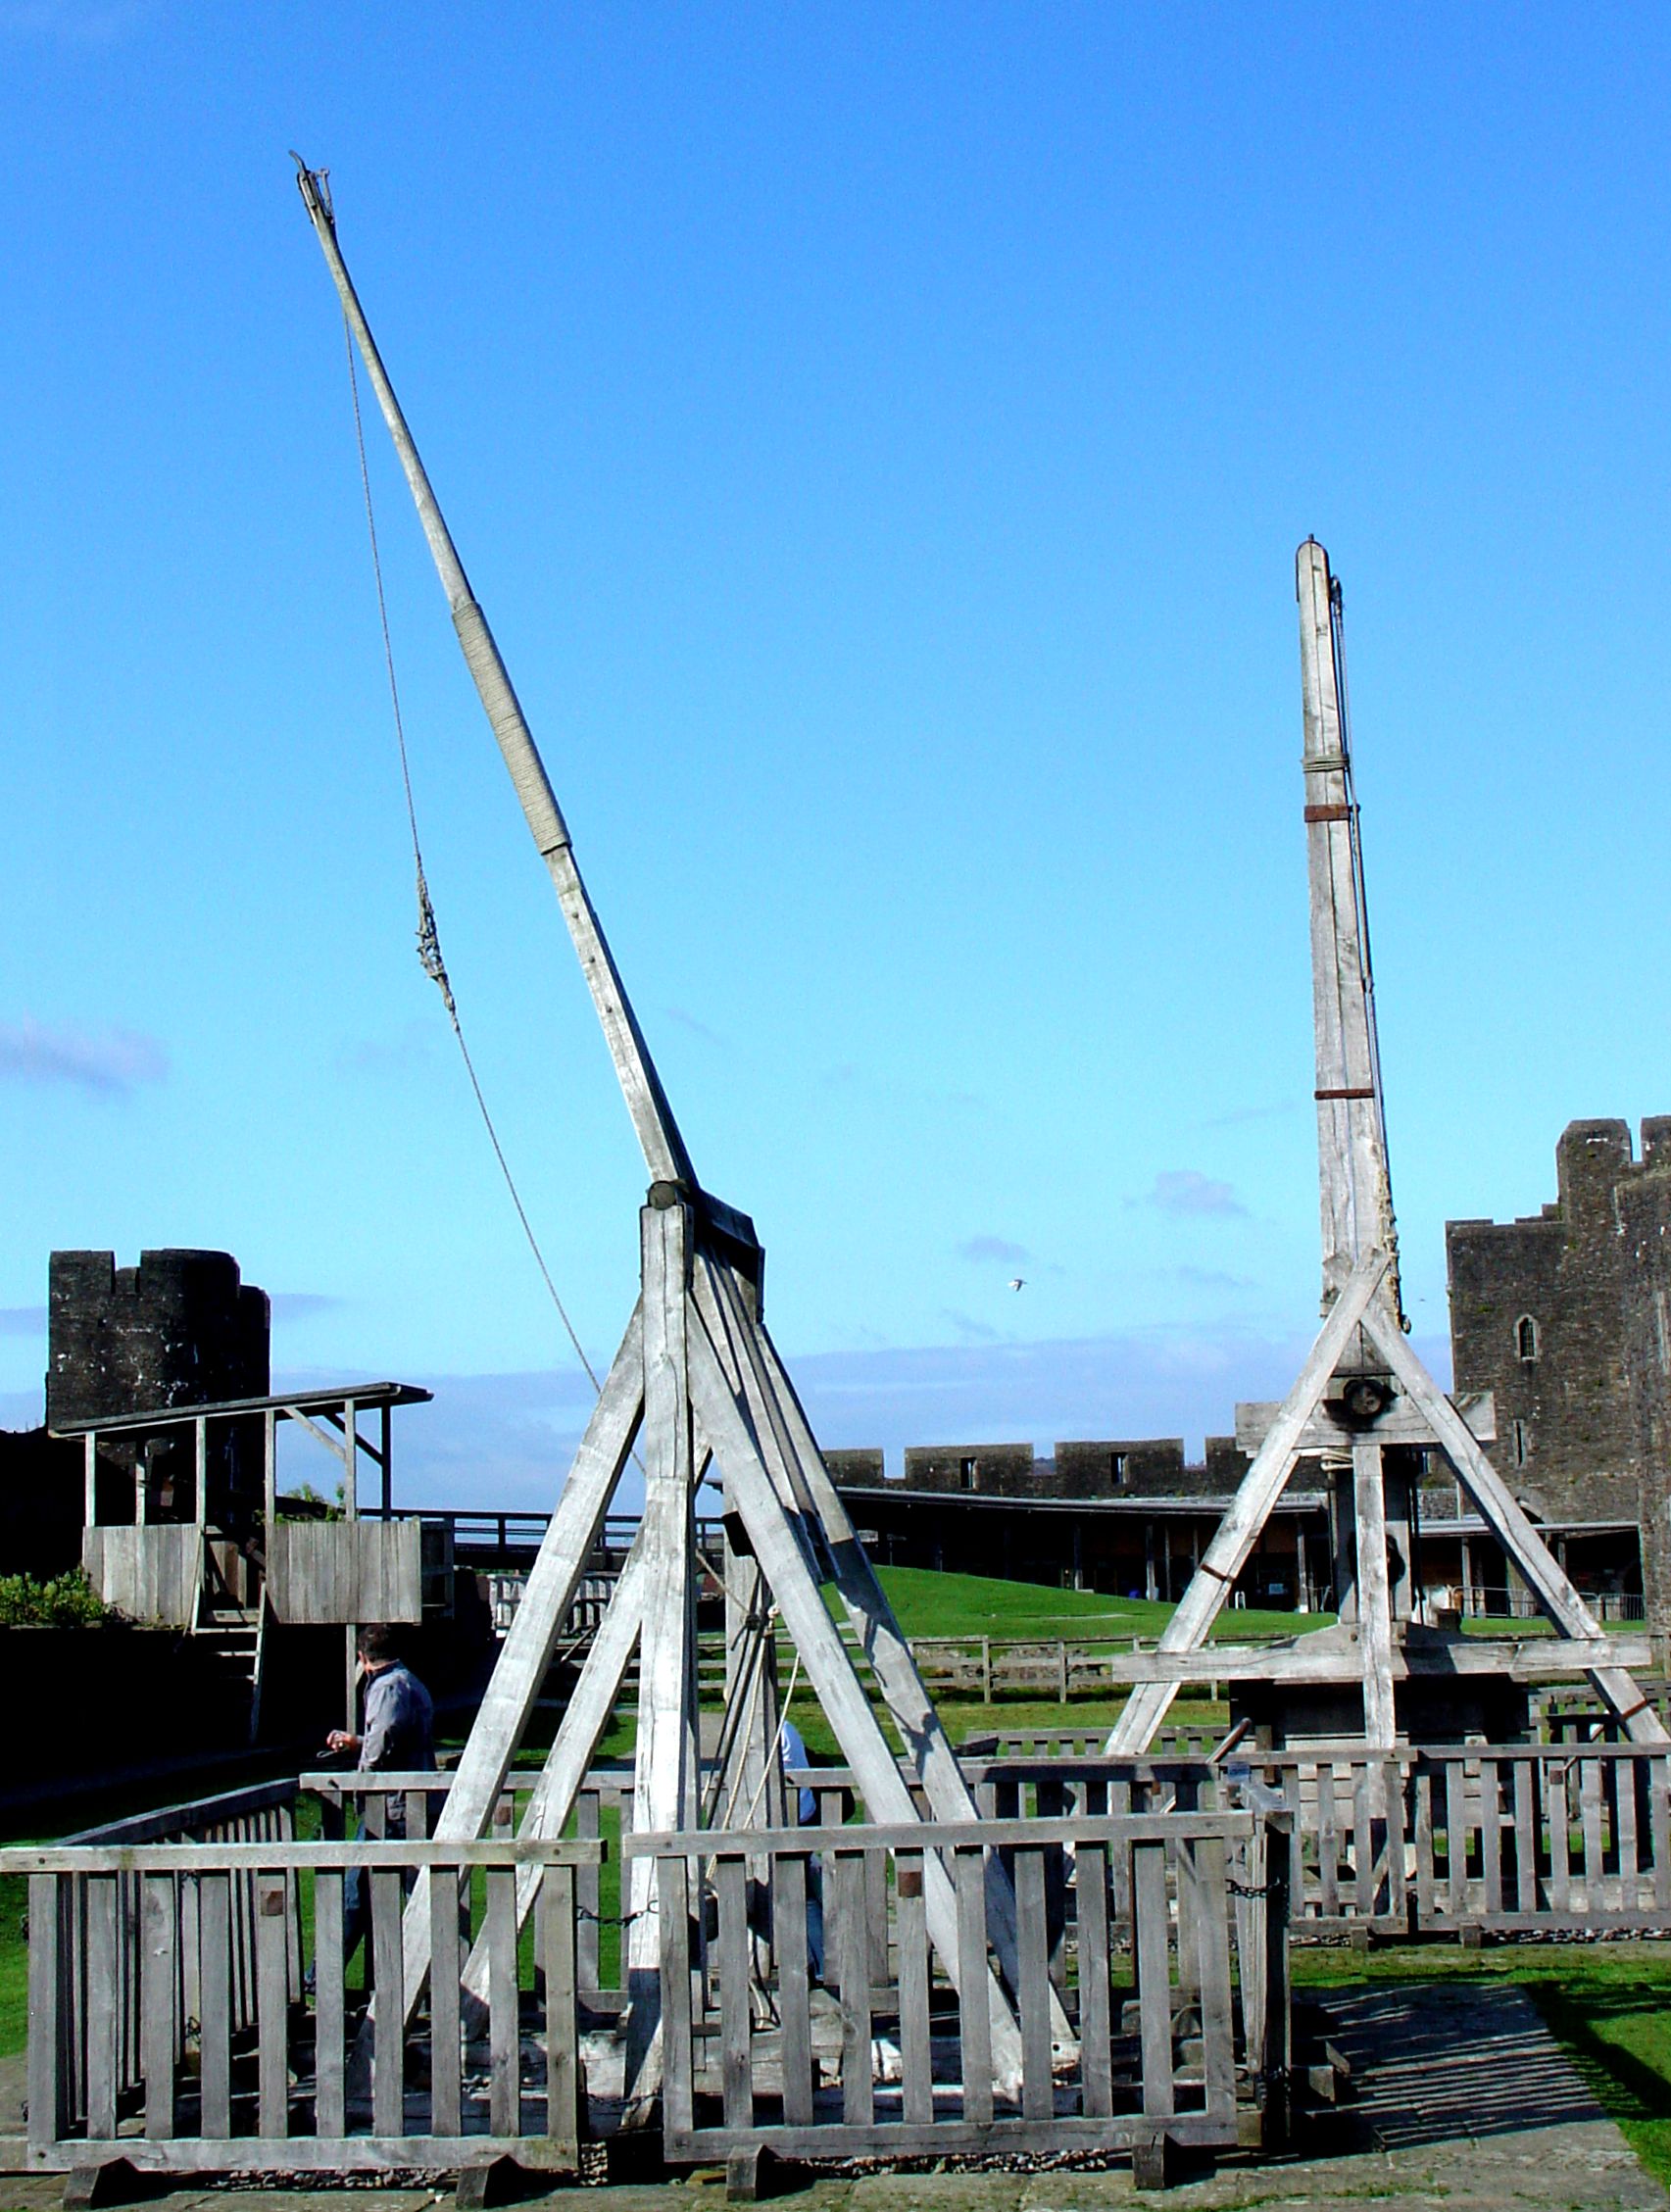 Identify the various siege weapons used in medieval warfare. How were